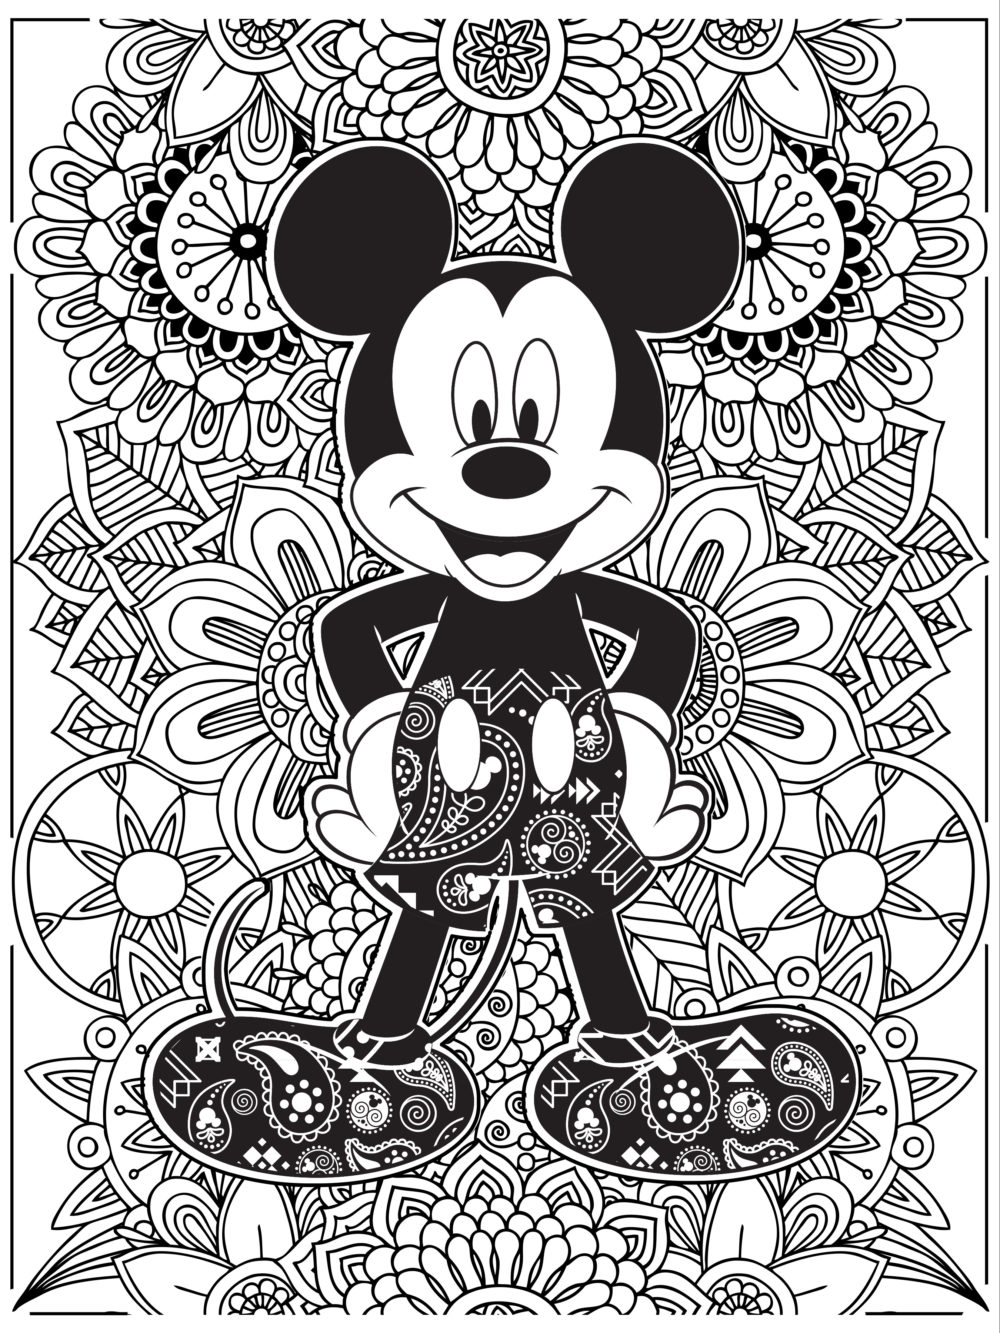 Coloring Disney Pages Celebrate National Coloring Book Day With Disney Style